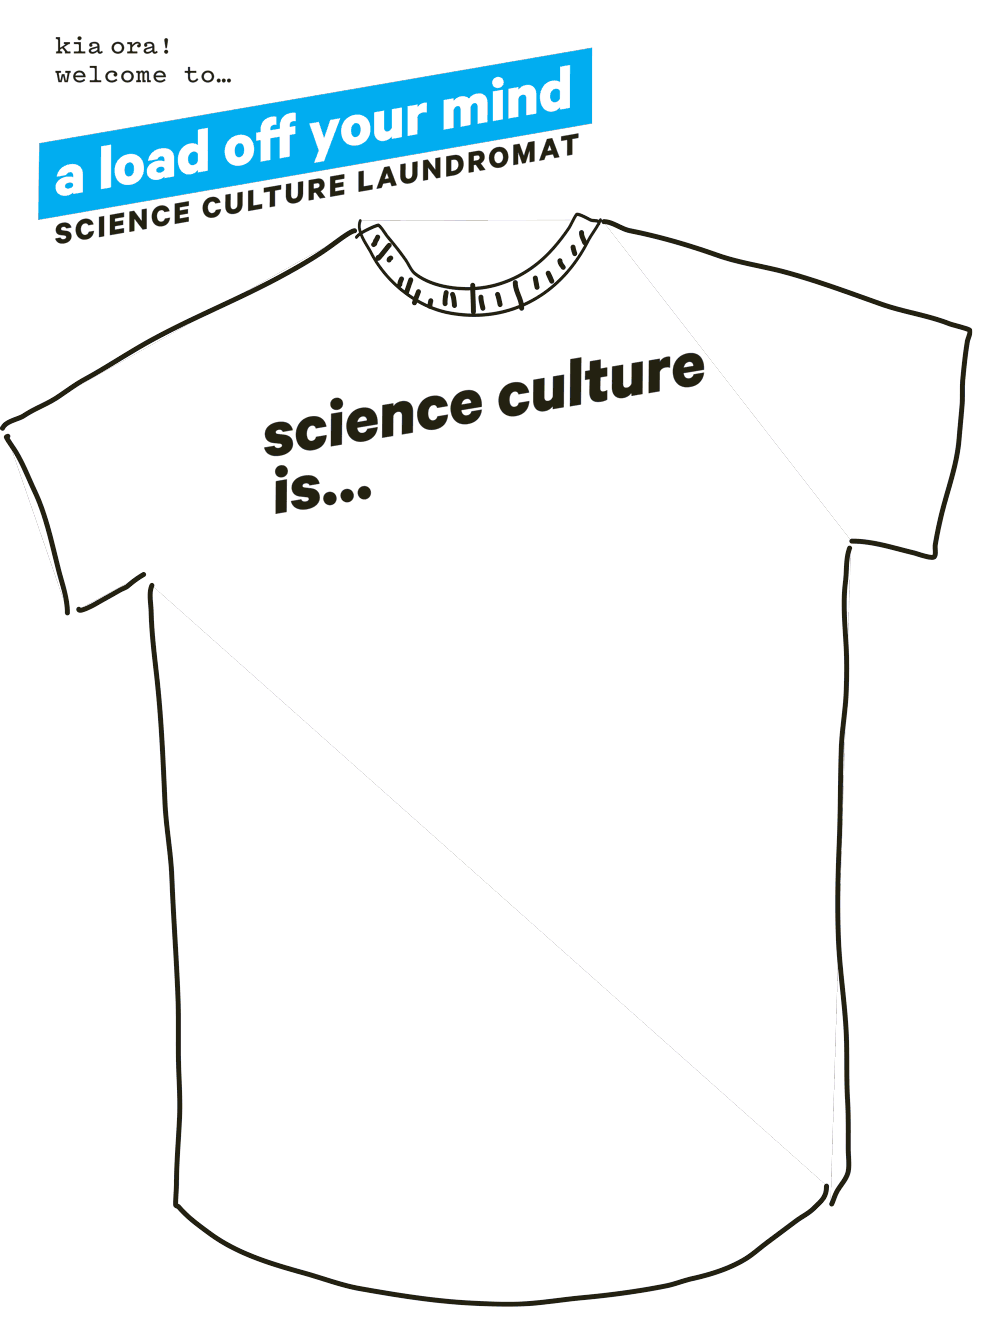 Science culture is… prompts